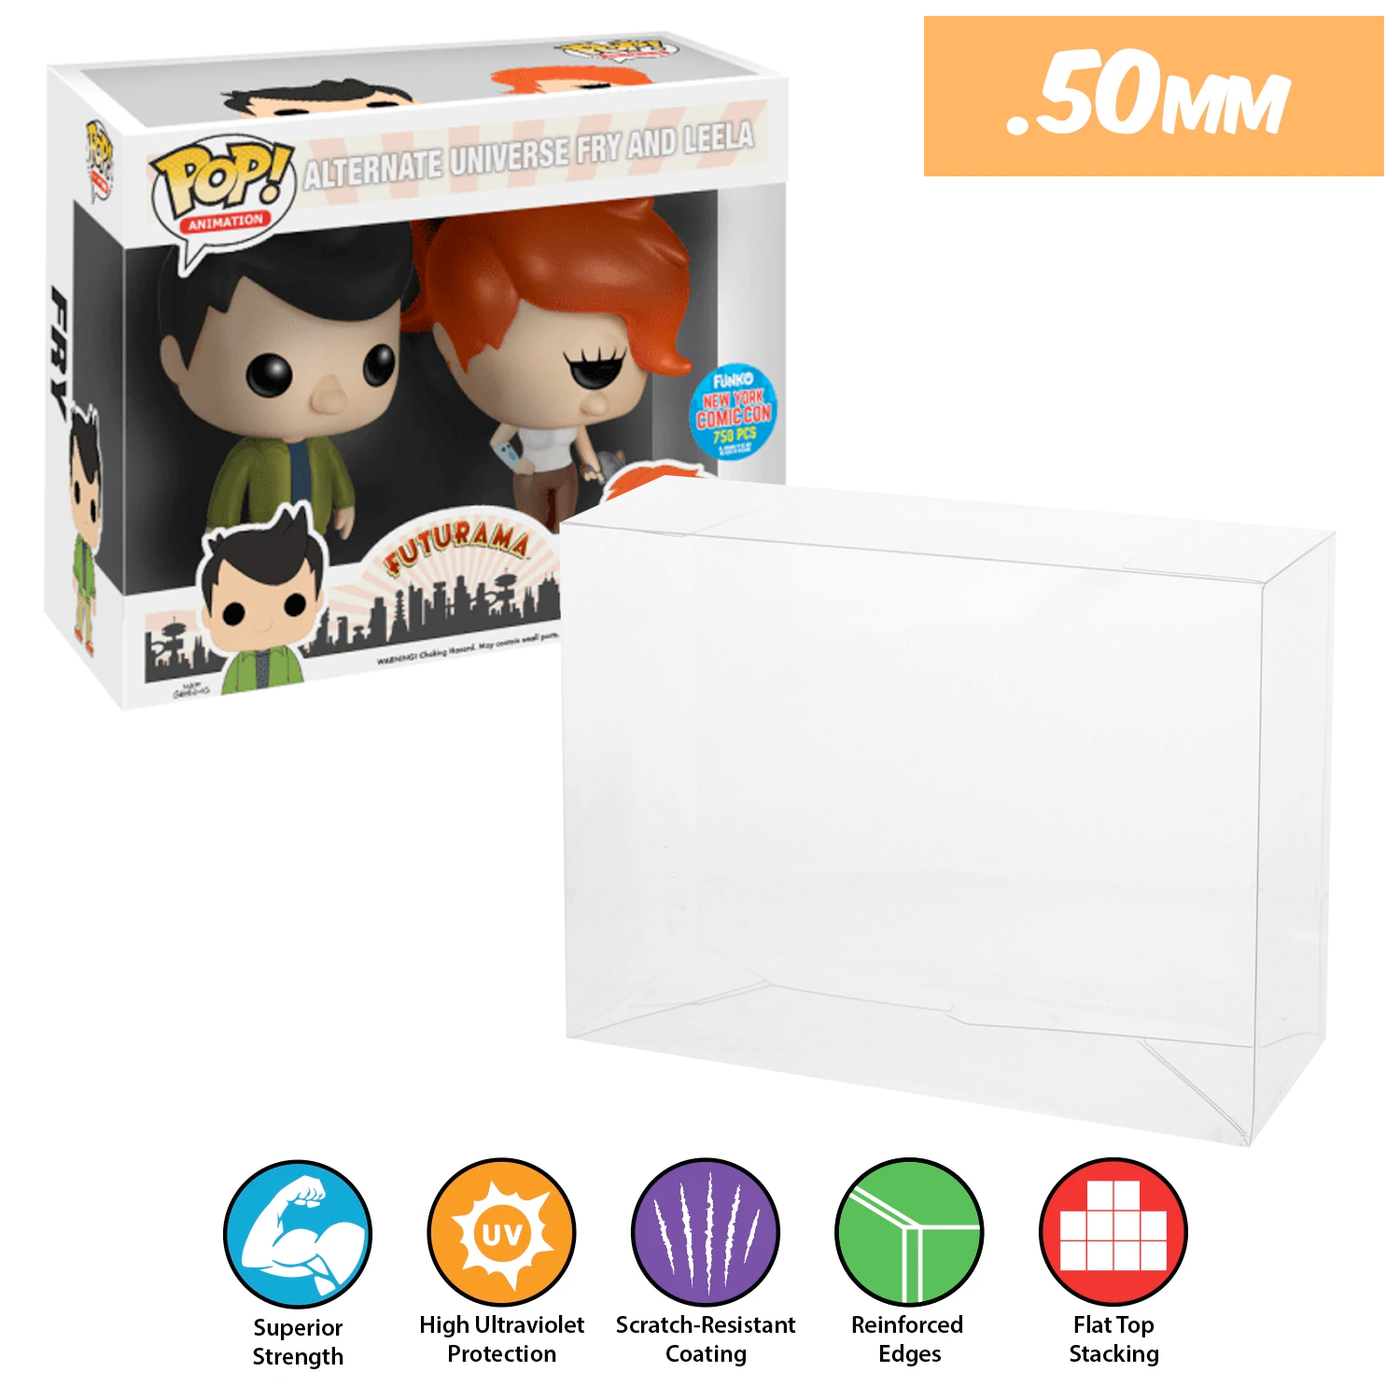 alternative universe fry leela 2 pack best funko pop protectors thick strong uv scratch flat top stack vinyl display geek plastic shield vaulted eco armor fits collect protect display case kollector protector